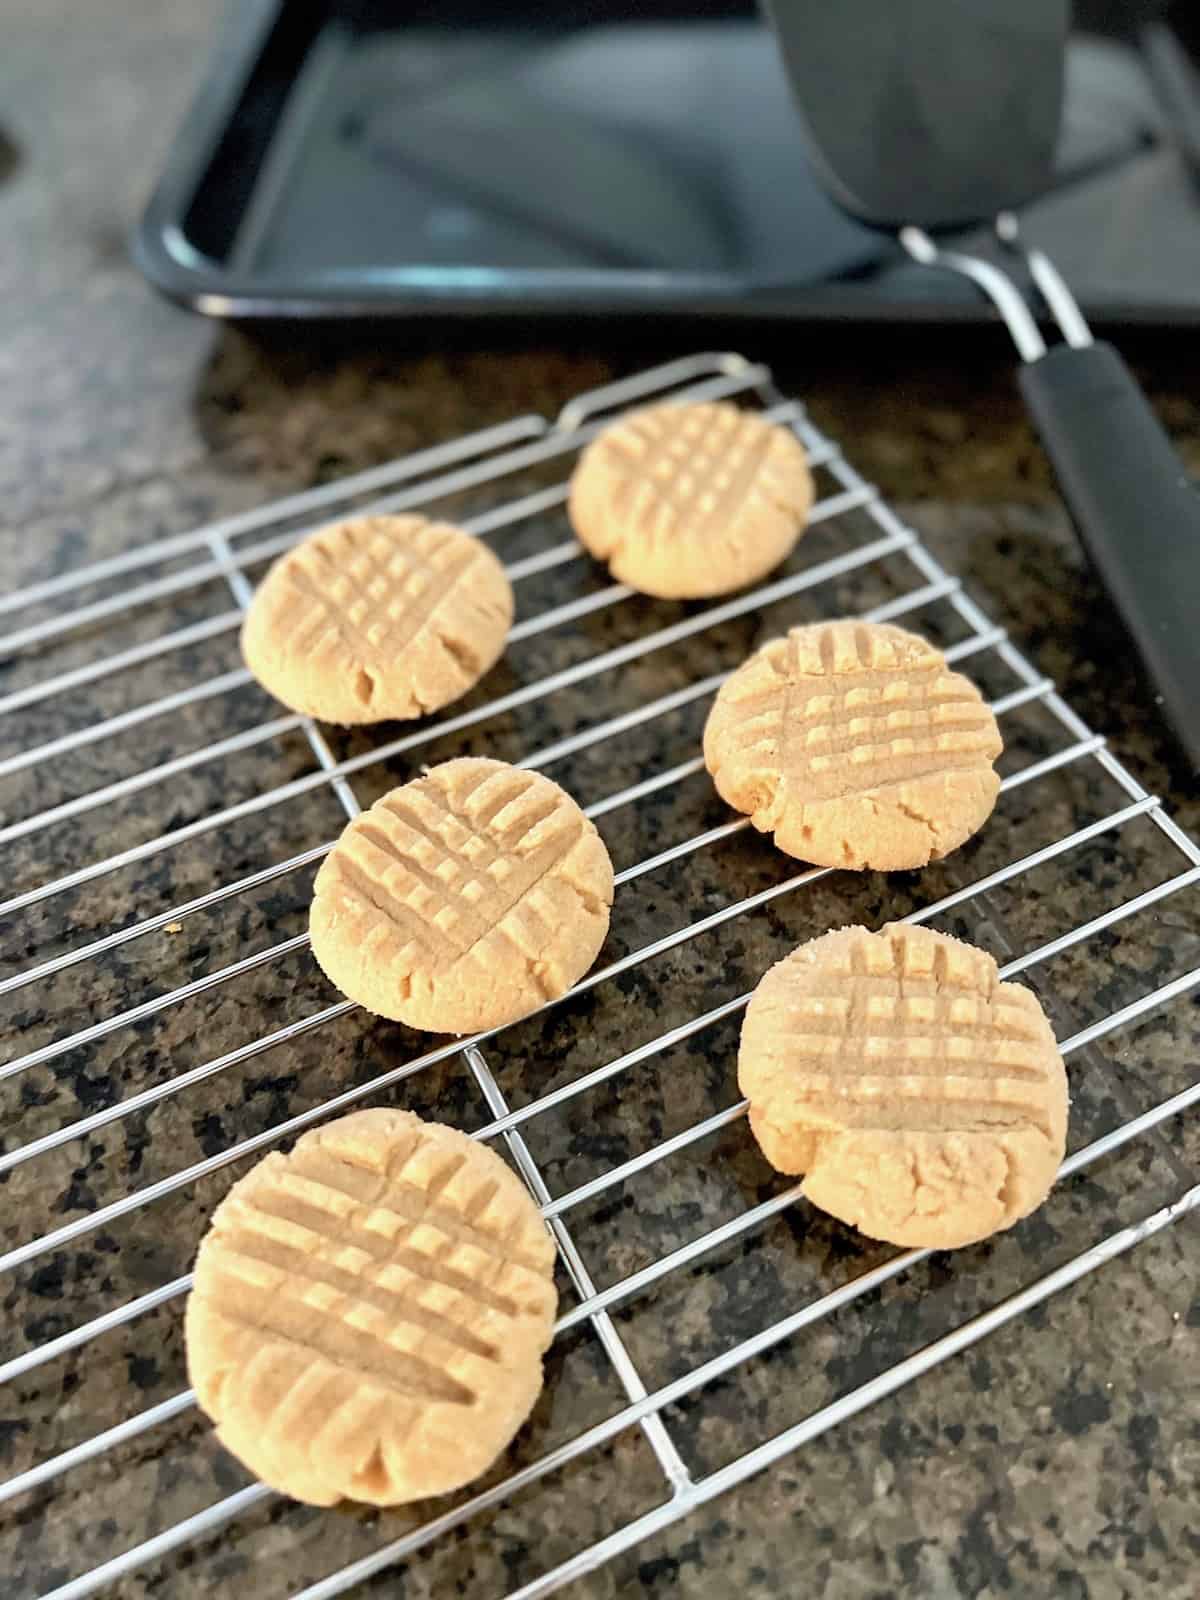 Cookies cooling on a rack.